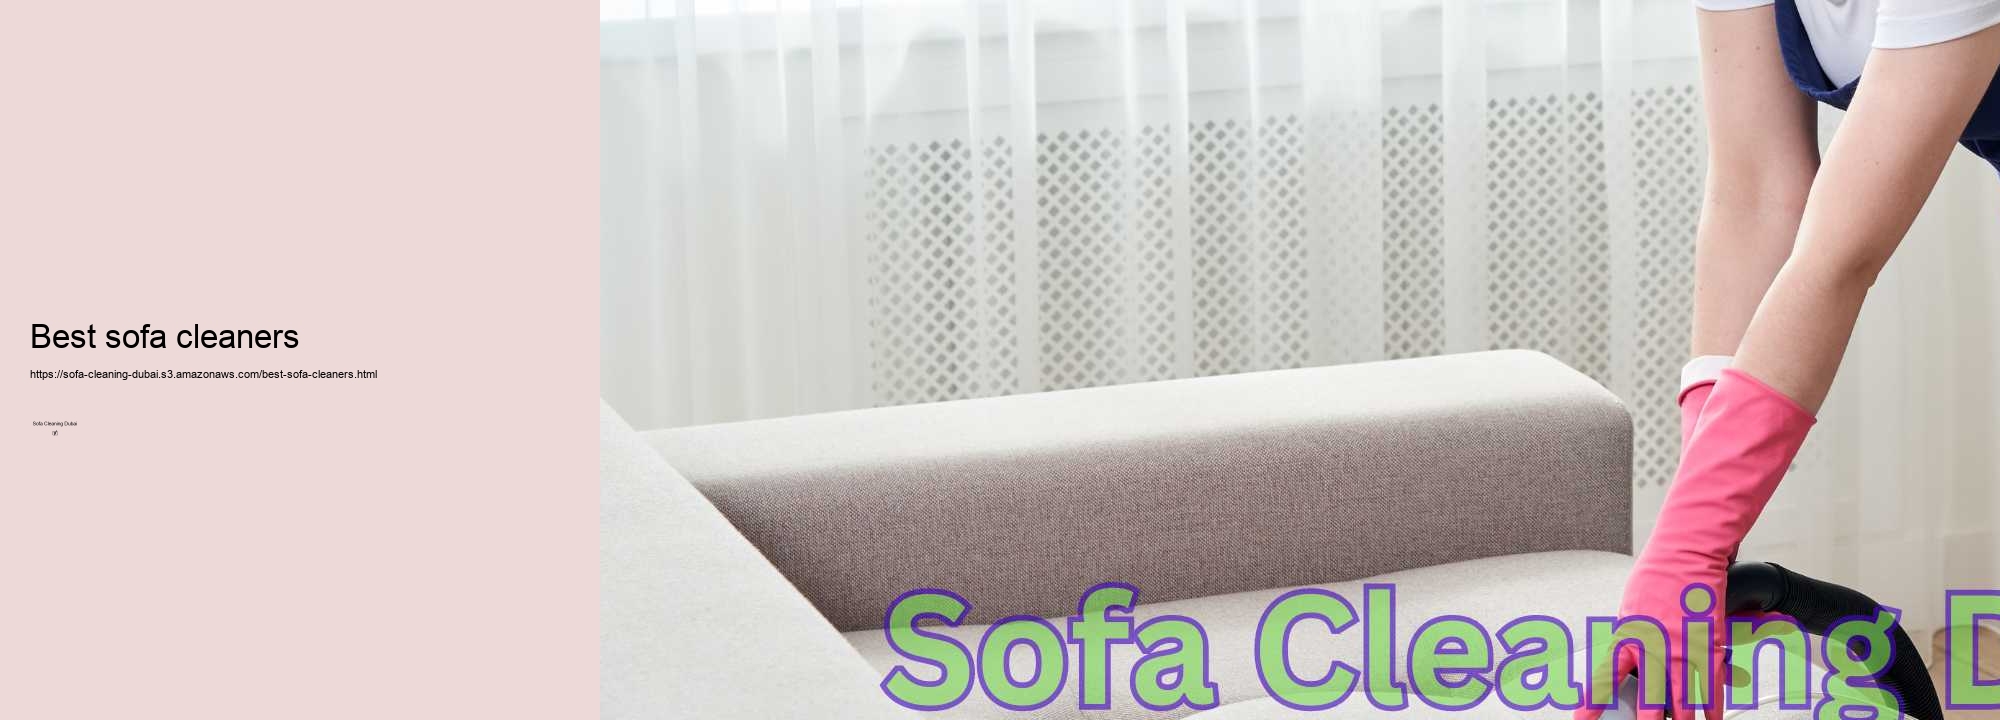 Best sofa cleaners